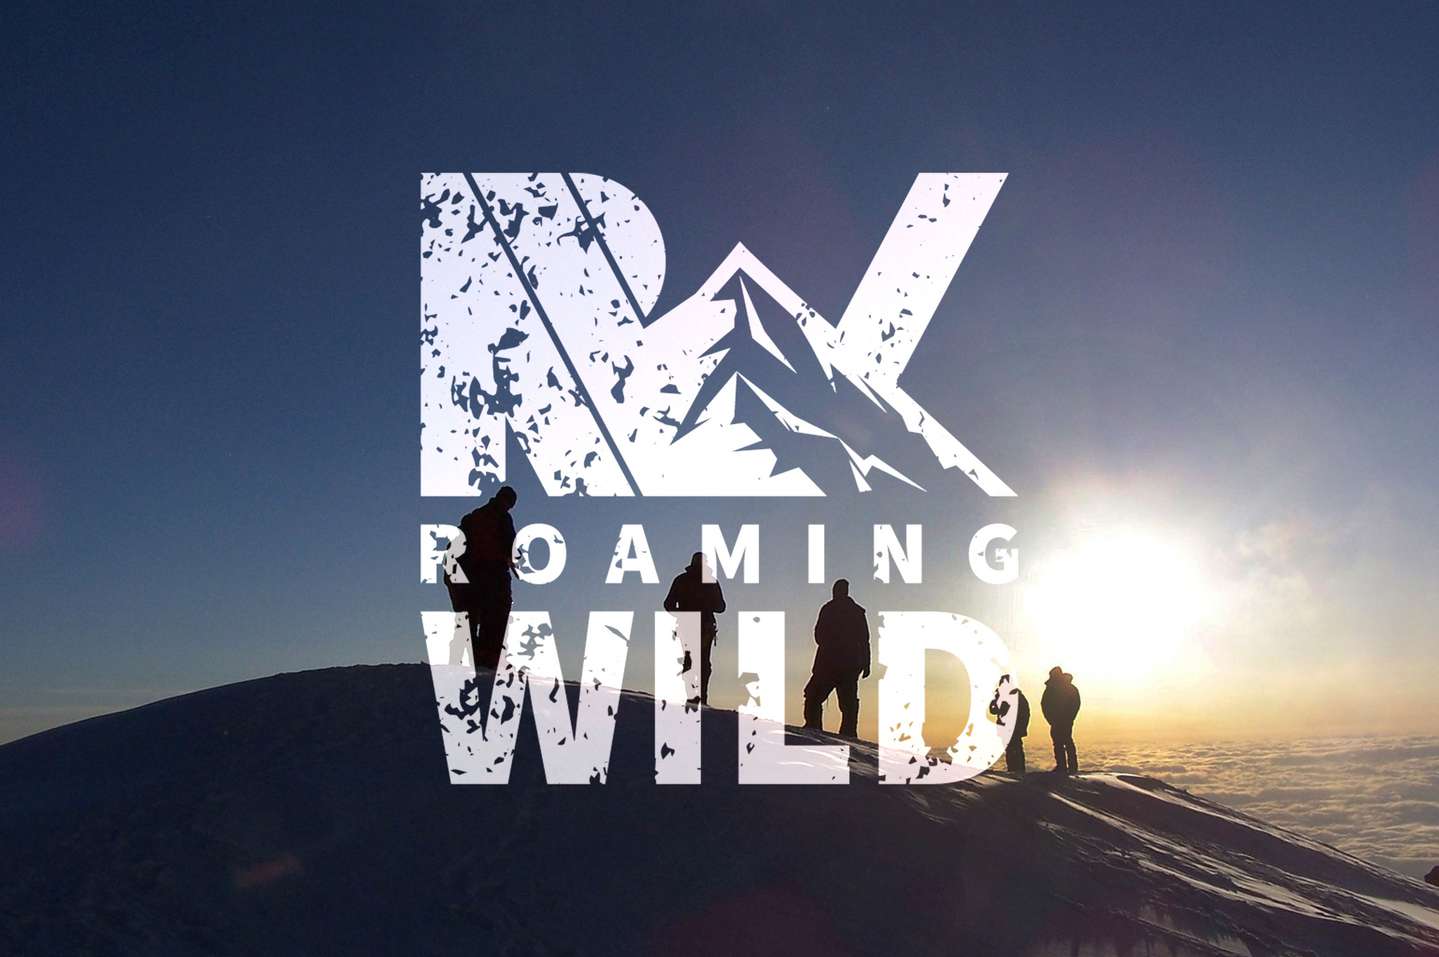 Roaming Wild logo placed over image of hikers climing a ridge